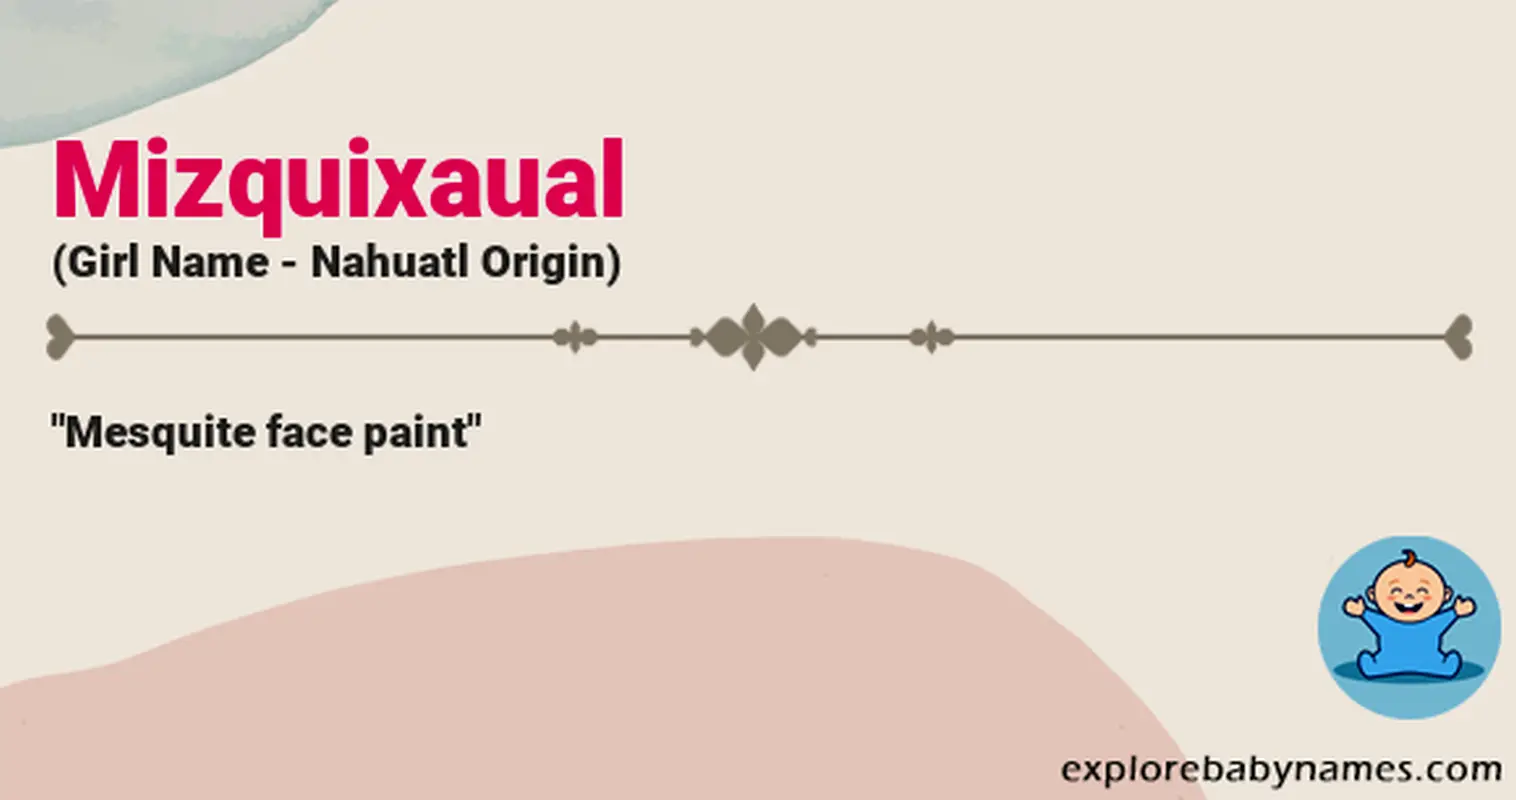 Meaning of Mizquixaual